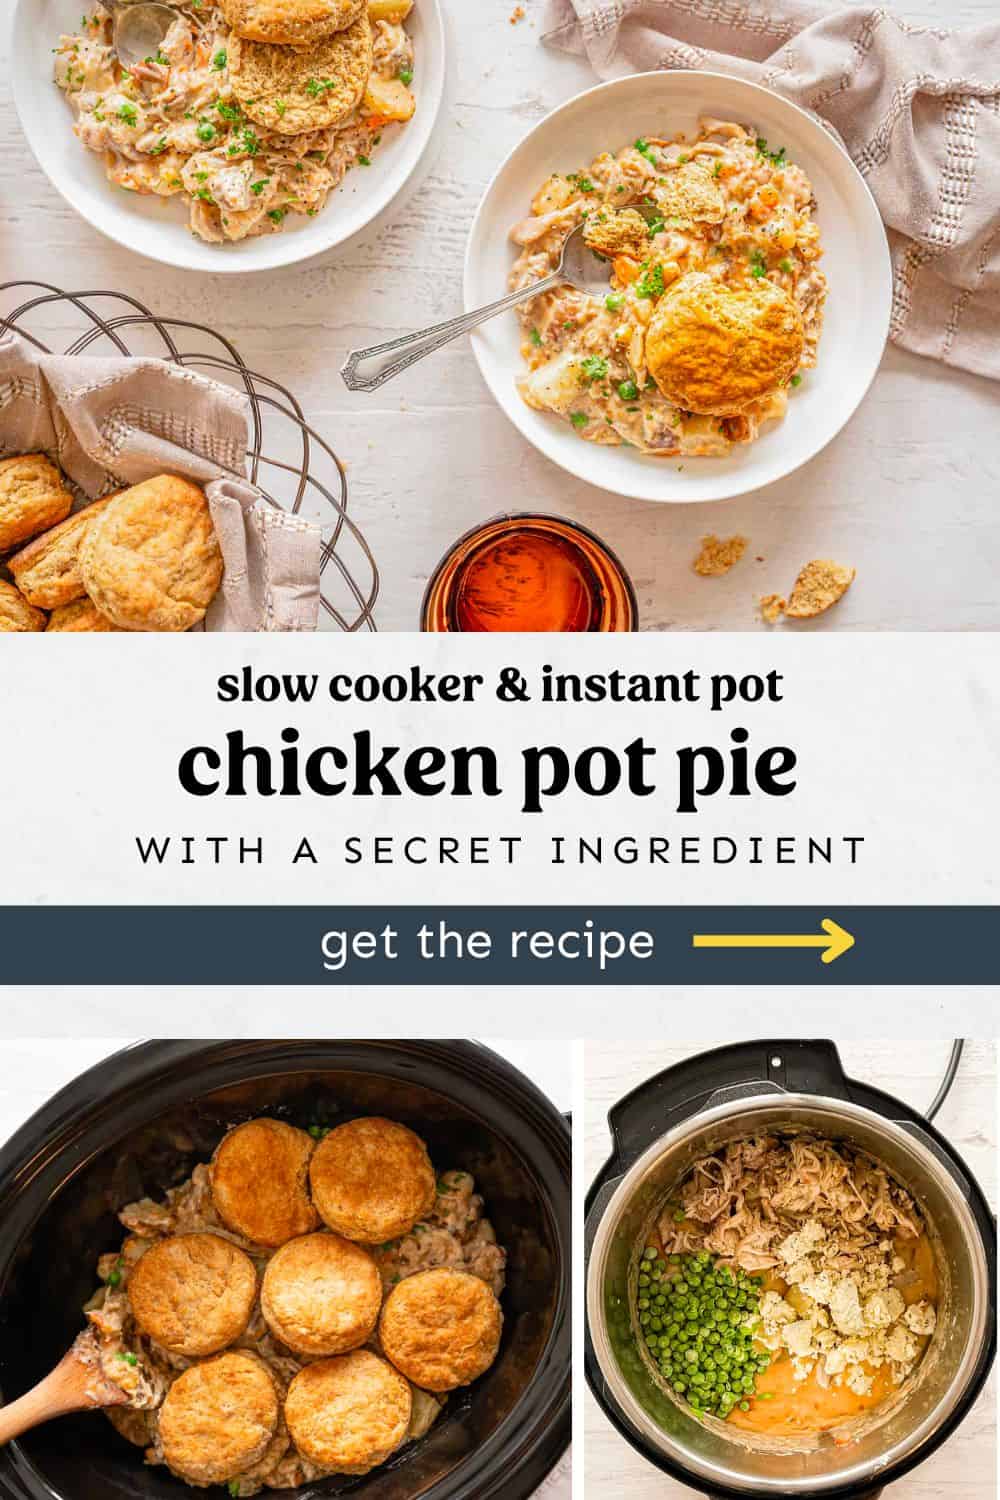 Two bowls of chicken pot pie with biscuits on top, a picture of chicken pot pie in the slow cooker, and another process shot of chicken pot pie ingredients in the Instant Pot.